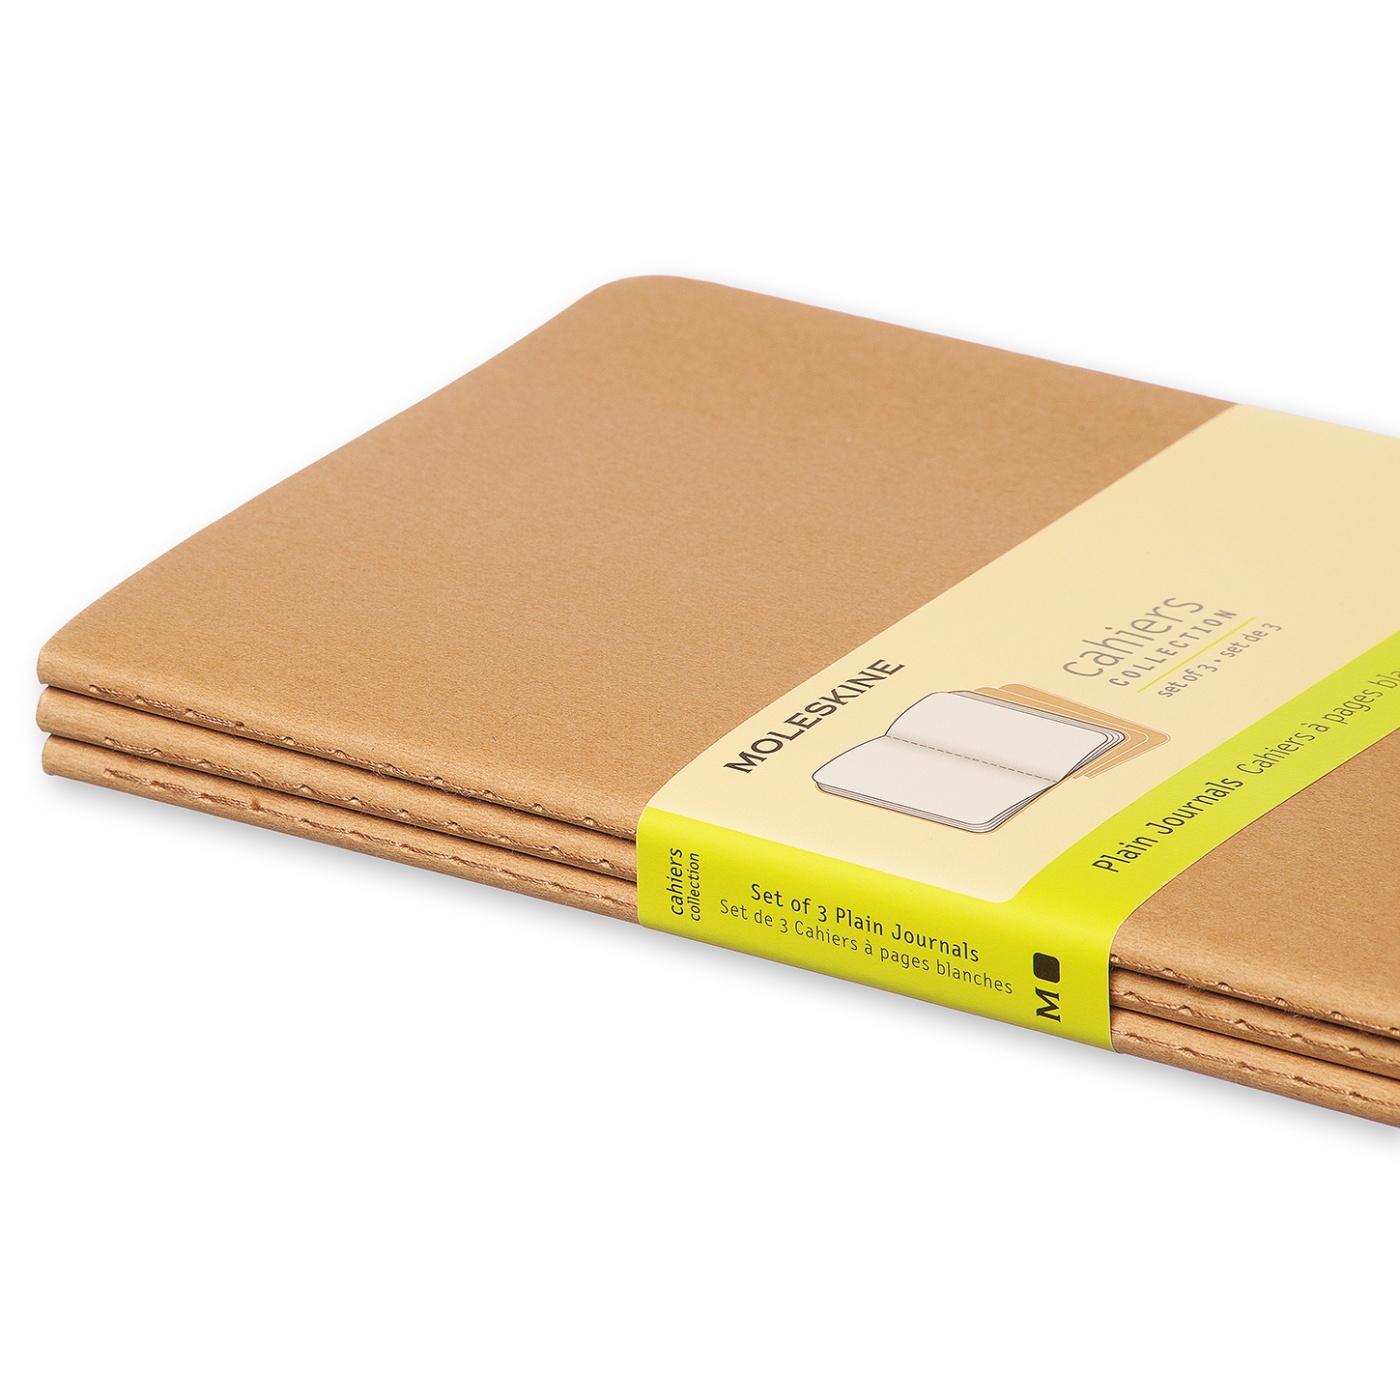 Cahier Large Kraft in the group Paper & Pads / Note & Memo / Writing & Memo Pads at Pen Store (100323_r)